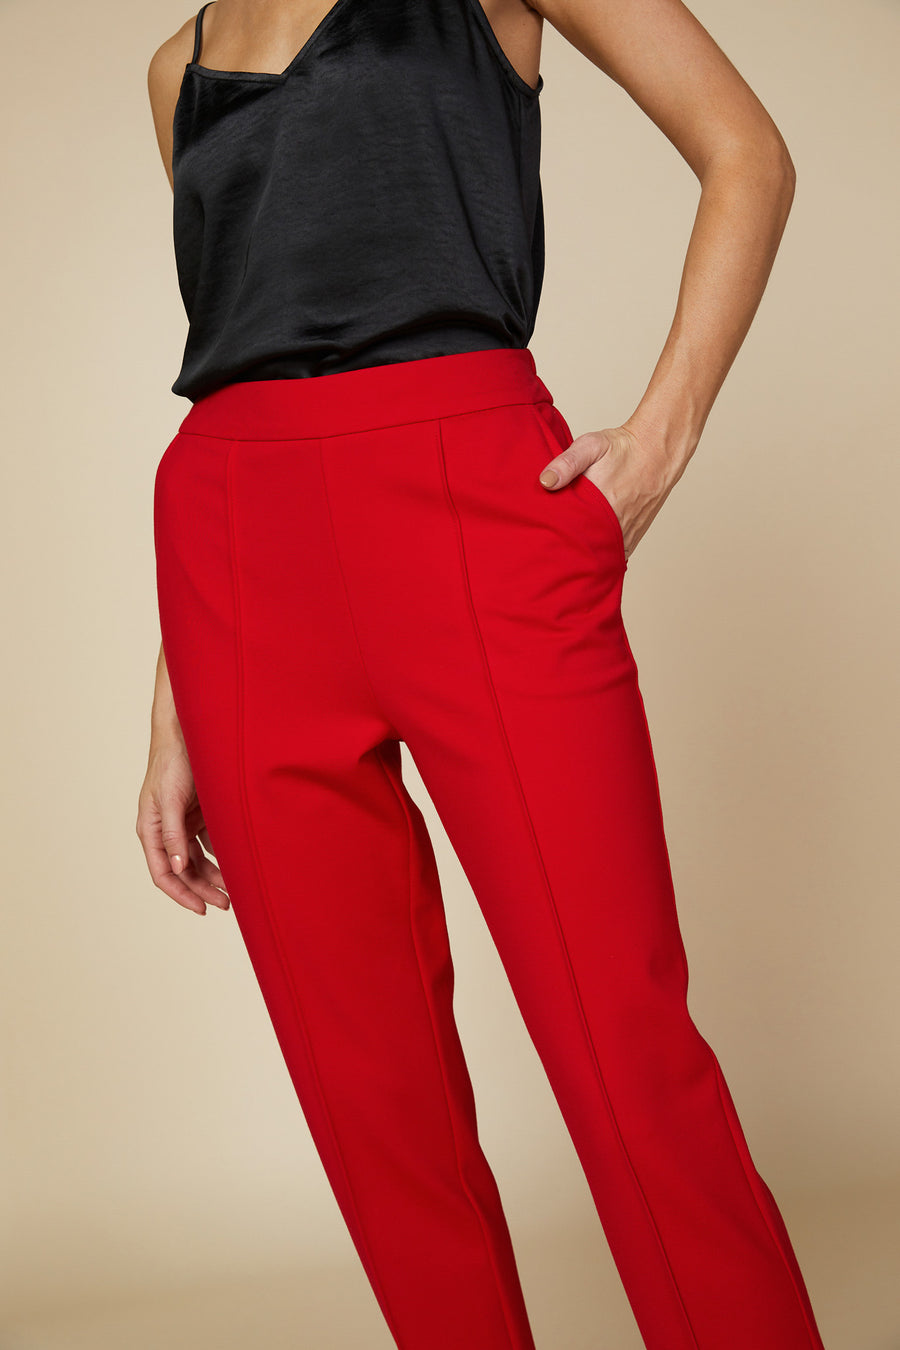 Skies are Blue Work Work Work Dress Pants - Scarlet Red, tapered leg, pull on, from pockets, pin tuck detail, plus size